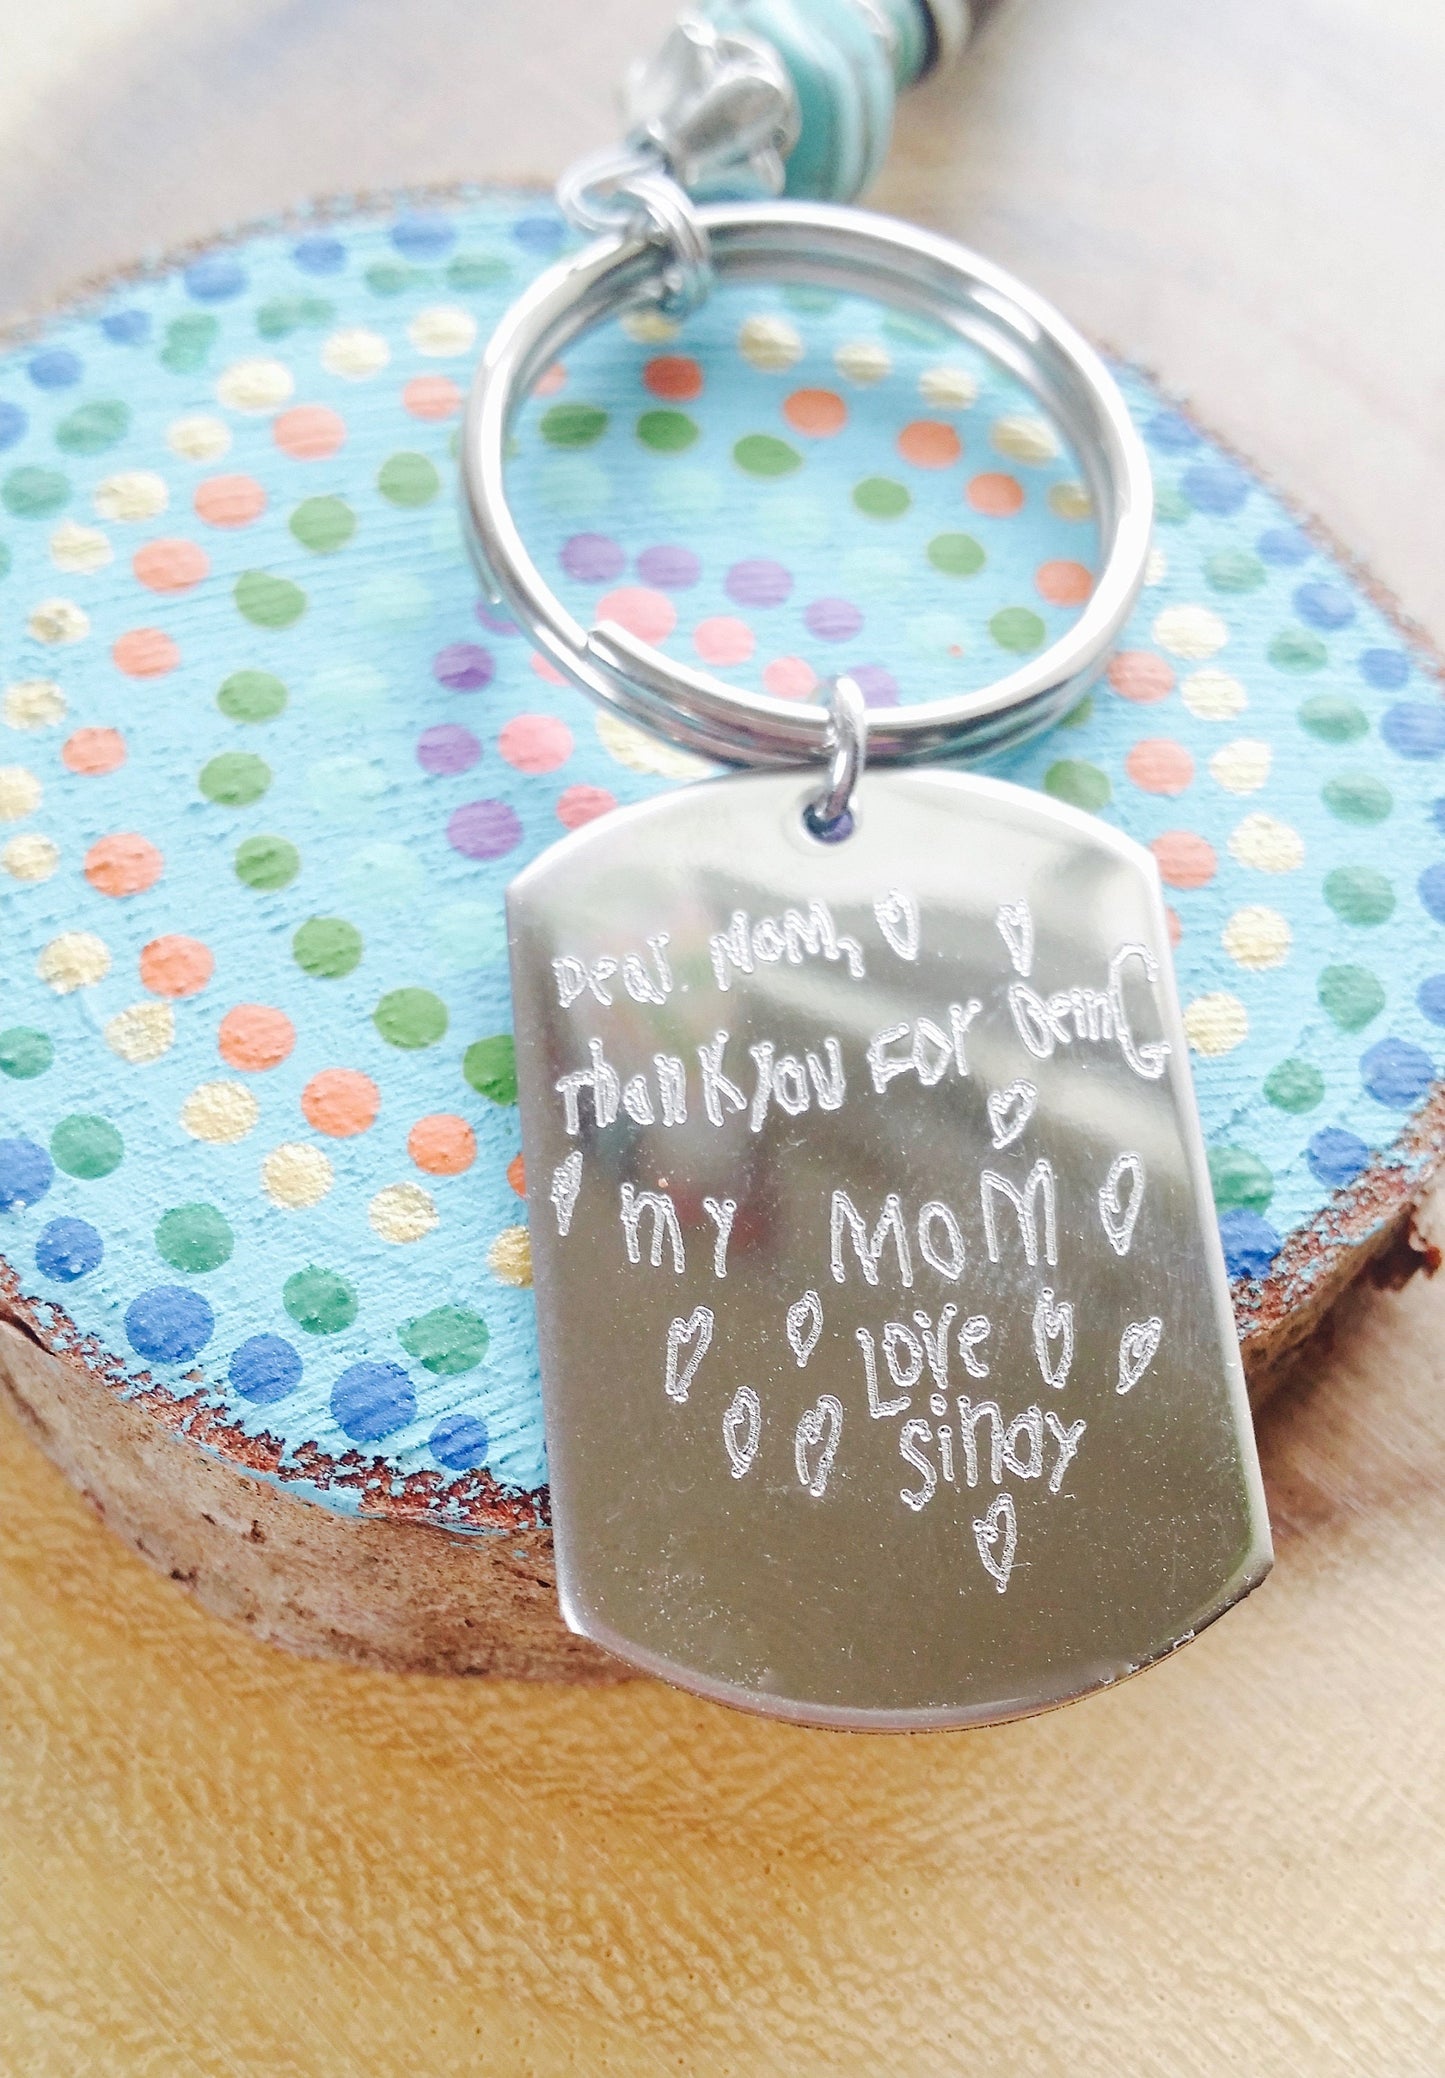 Child drawing engraved on a key chain, gift for parents/grandparents